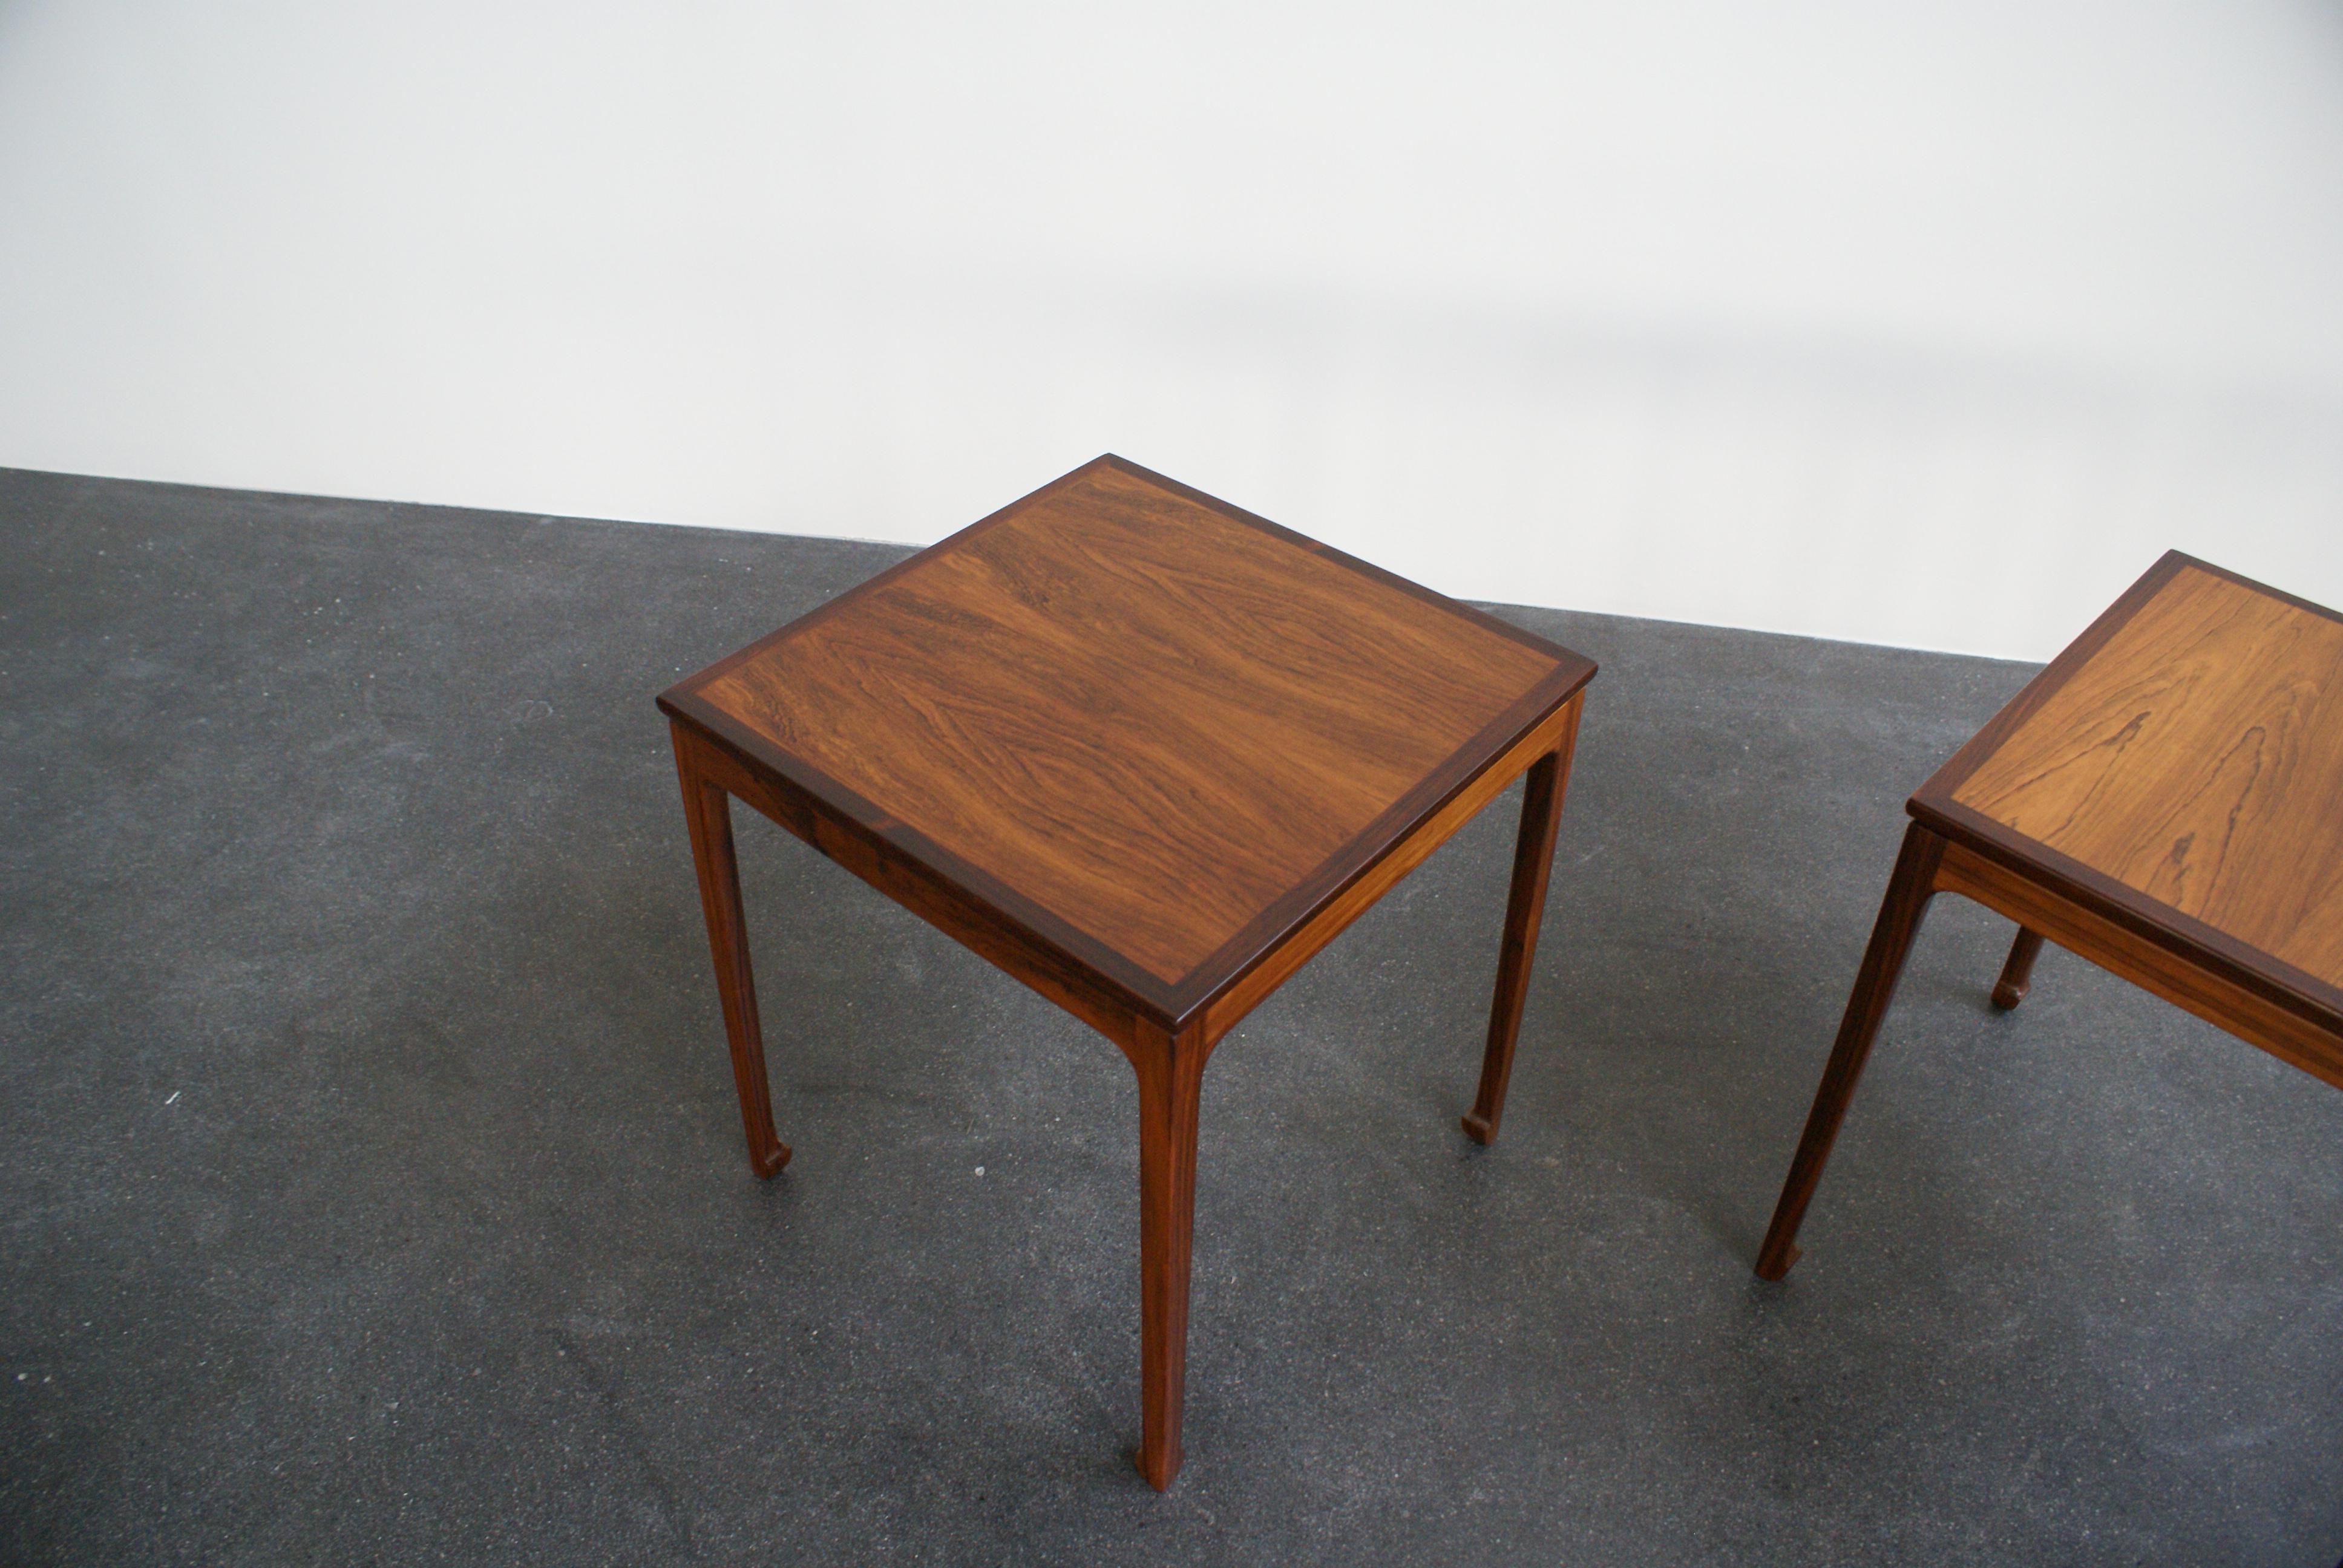 Ole Wanscher Pair of Side Tables in Brazilian Rosewood for A. J. Iversen, 1957 For Sale 8